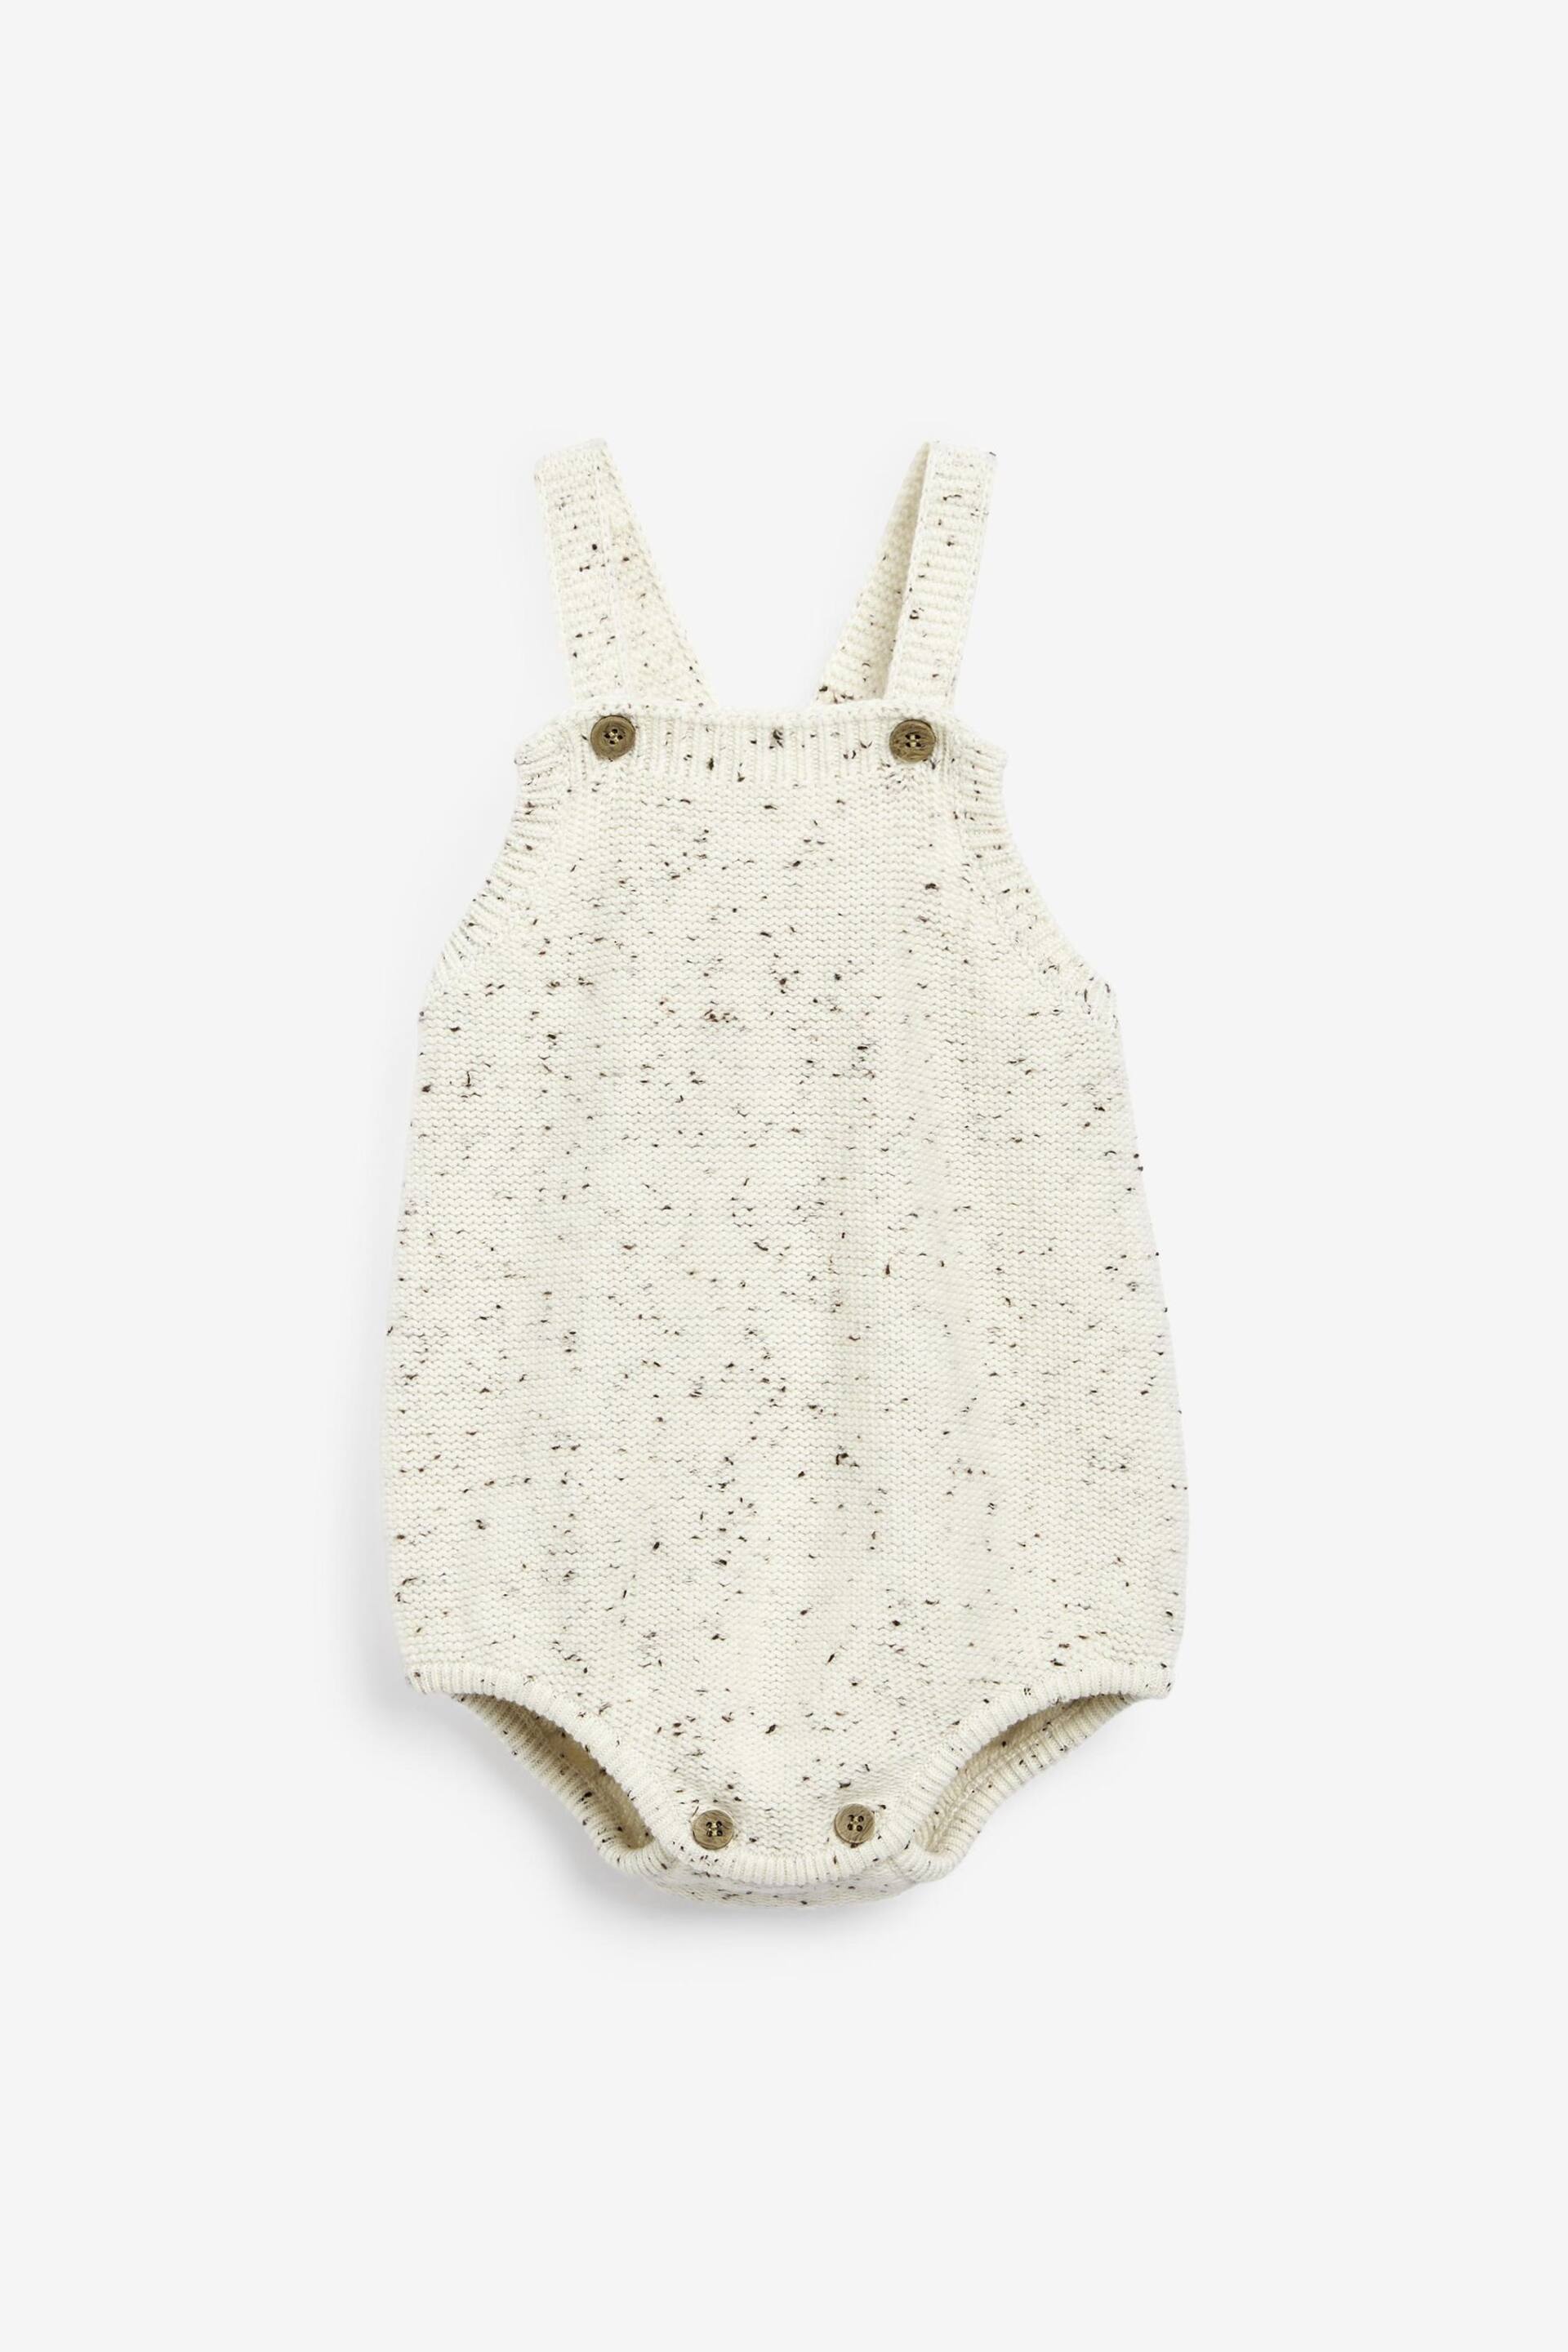 The Little Tailor Stylish Baby Knitted Romper - Image 9 of 11